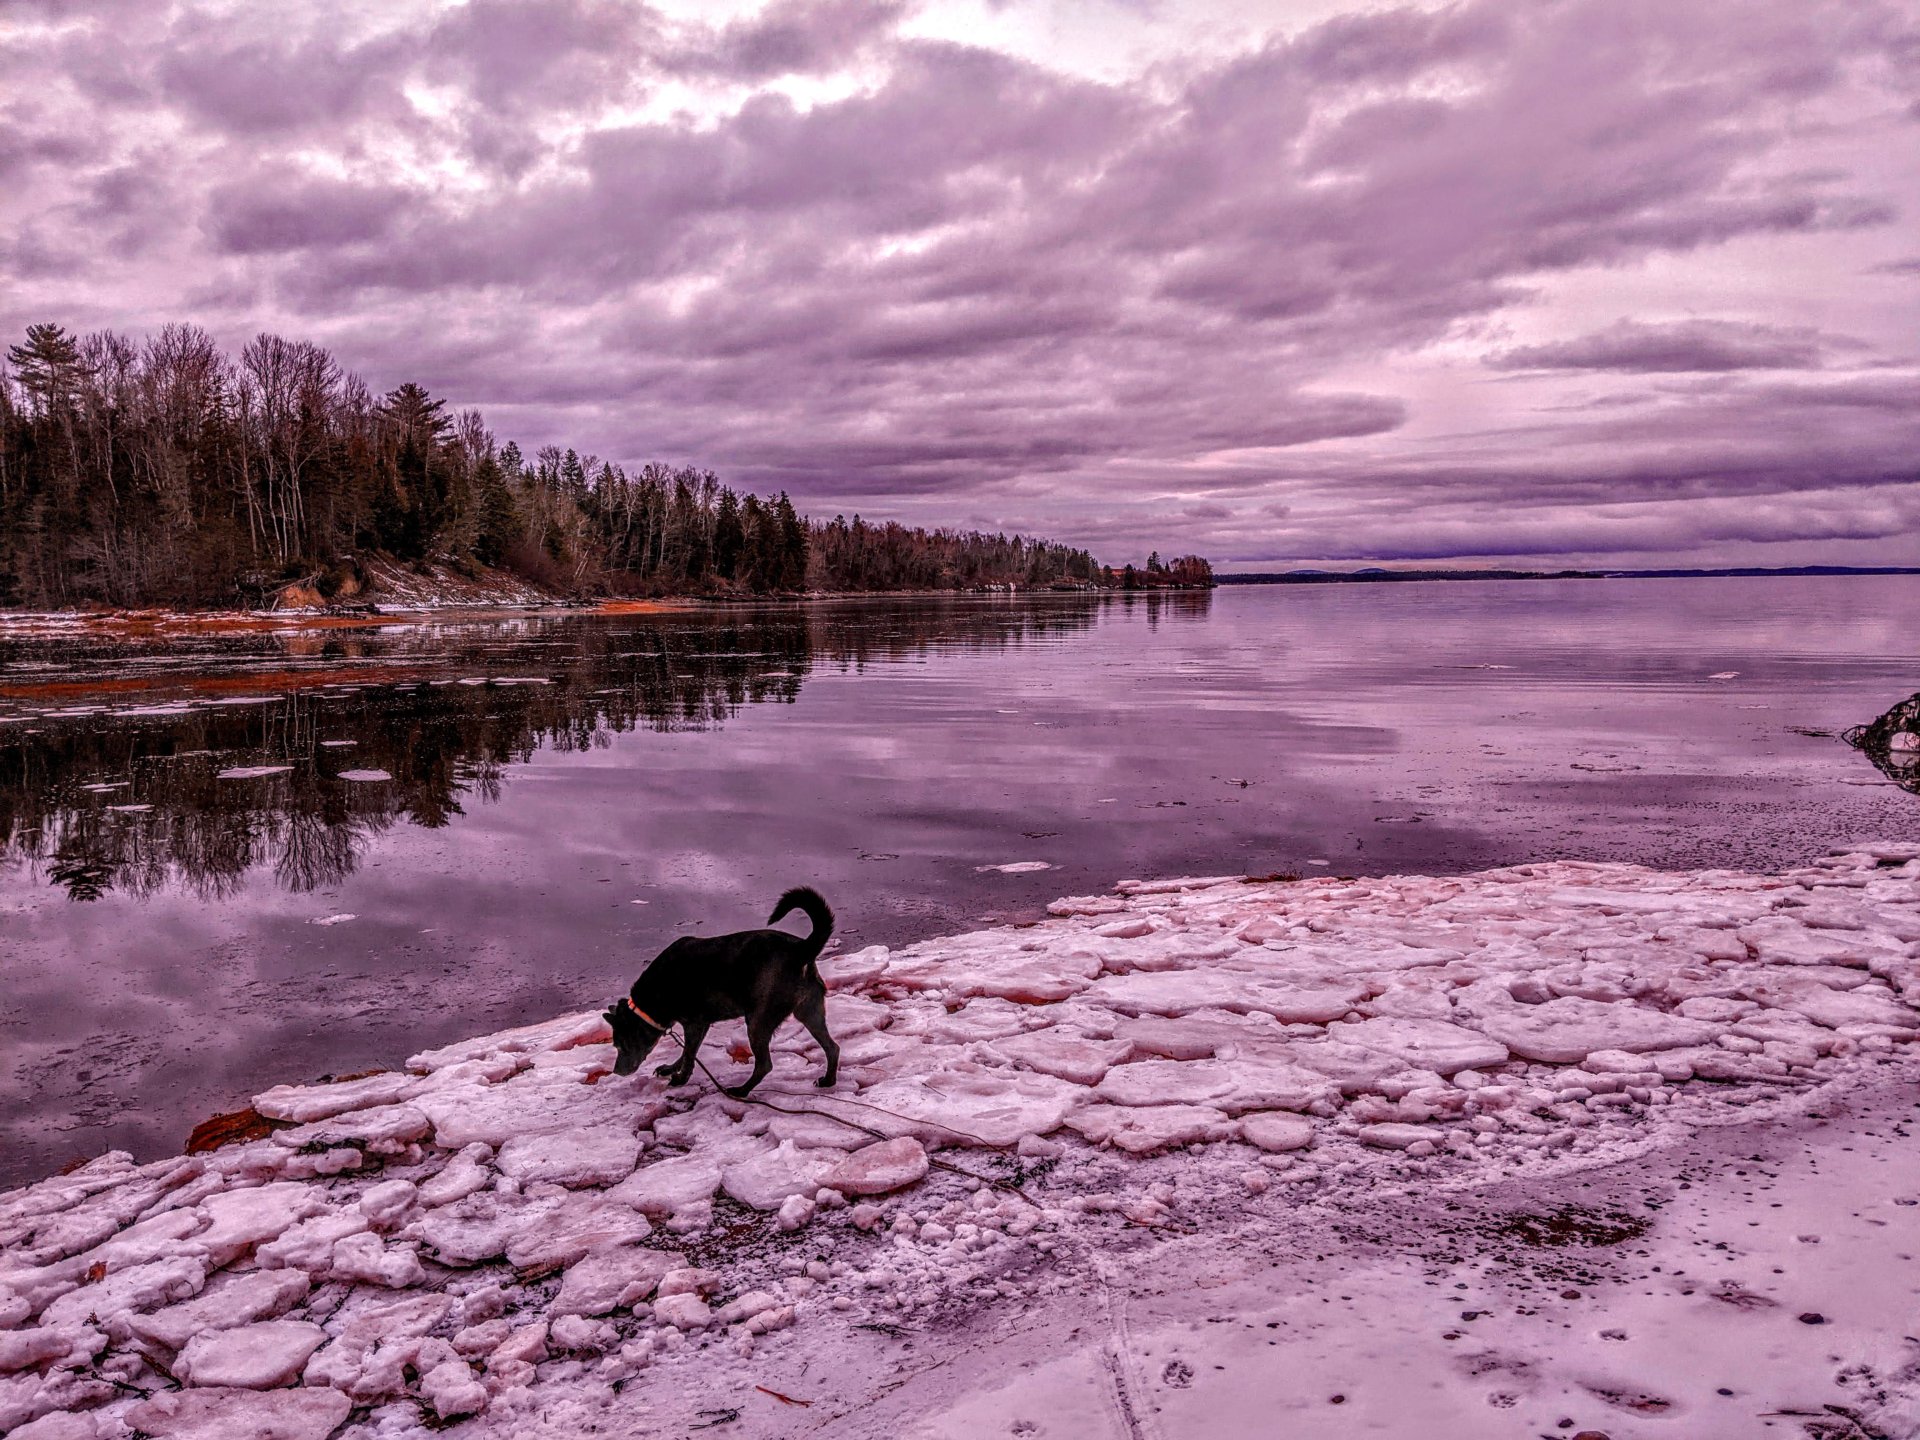 Lewis Cove in Perry, Maine Dec. 2020 with a black dog.